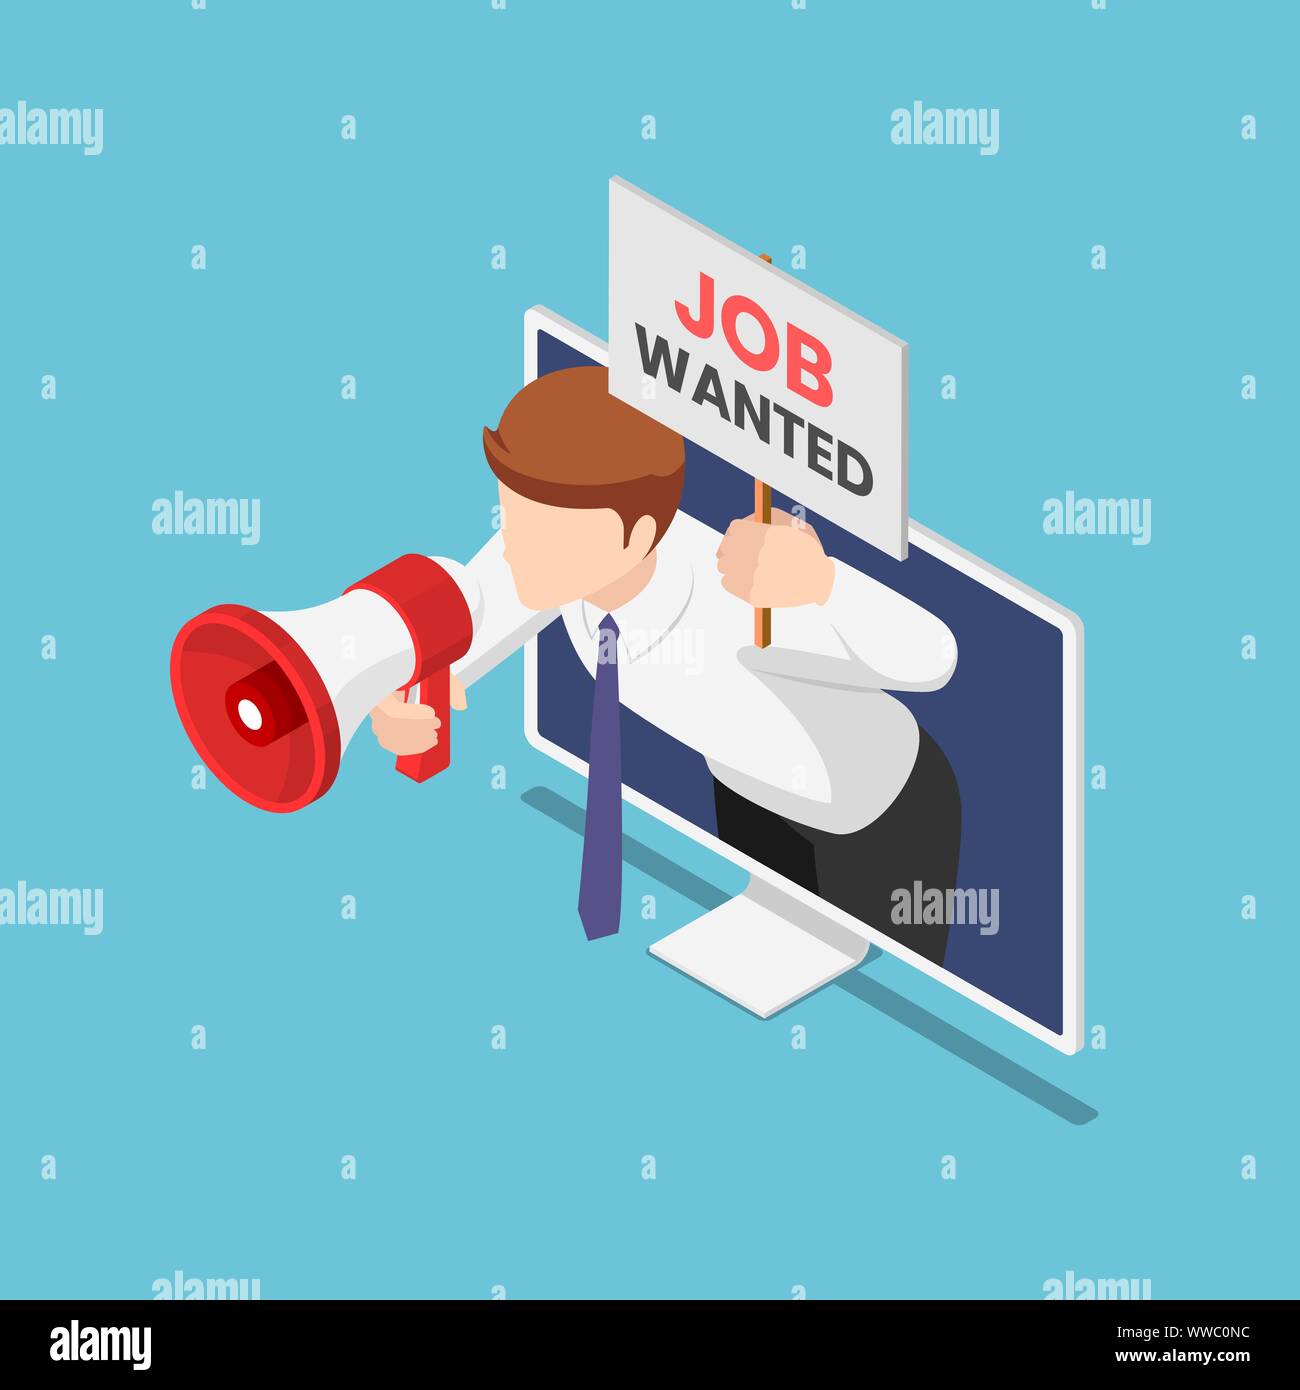 Flat 3d isometric businessman come out from monitor holding megaphone and job wanted sign. Online job searching concept. Stock Vector